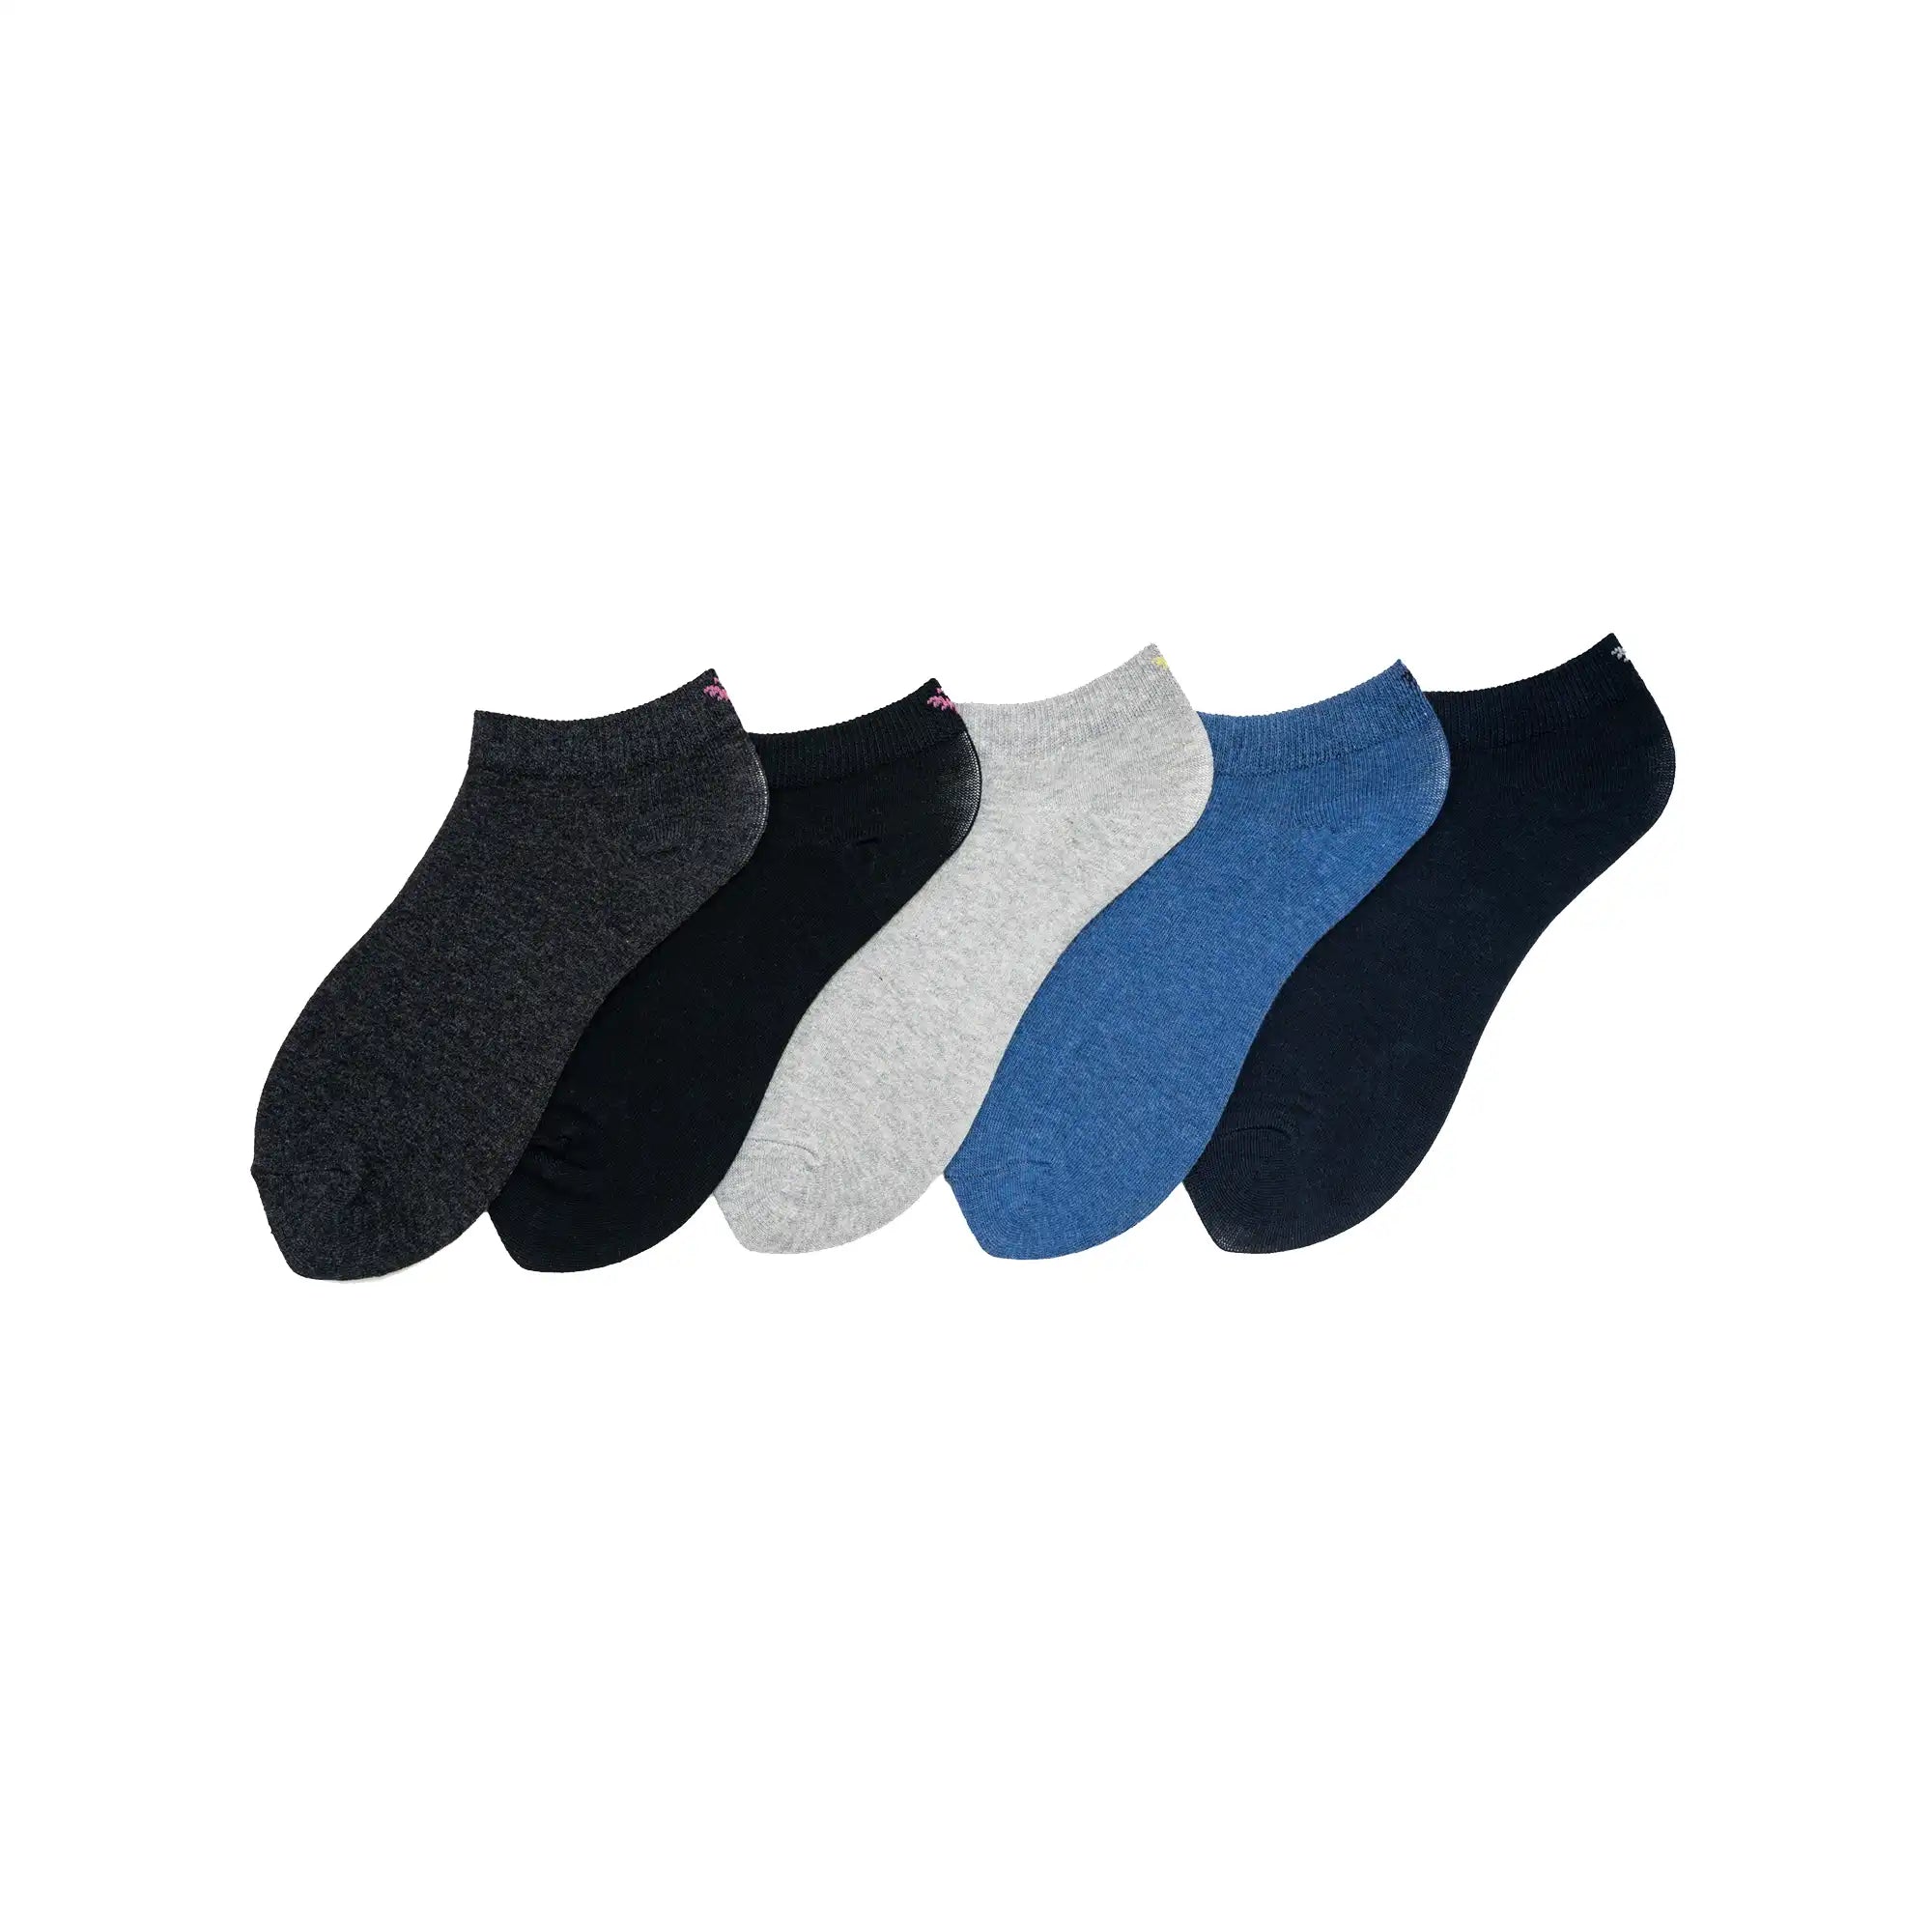 Young Wings Women's D.Multi Colour Cotton Fabric Design Low Ankle Length Socks - Pack of 5, Style no. 6101-W